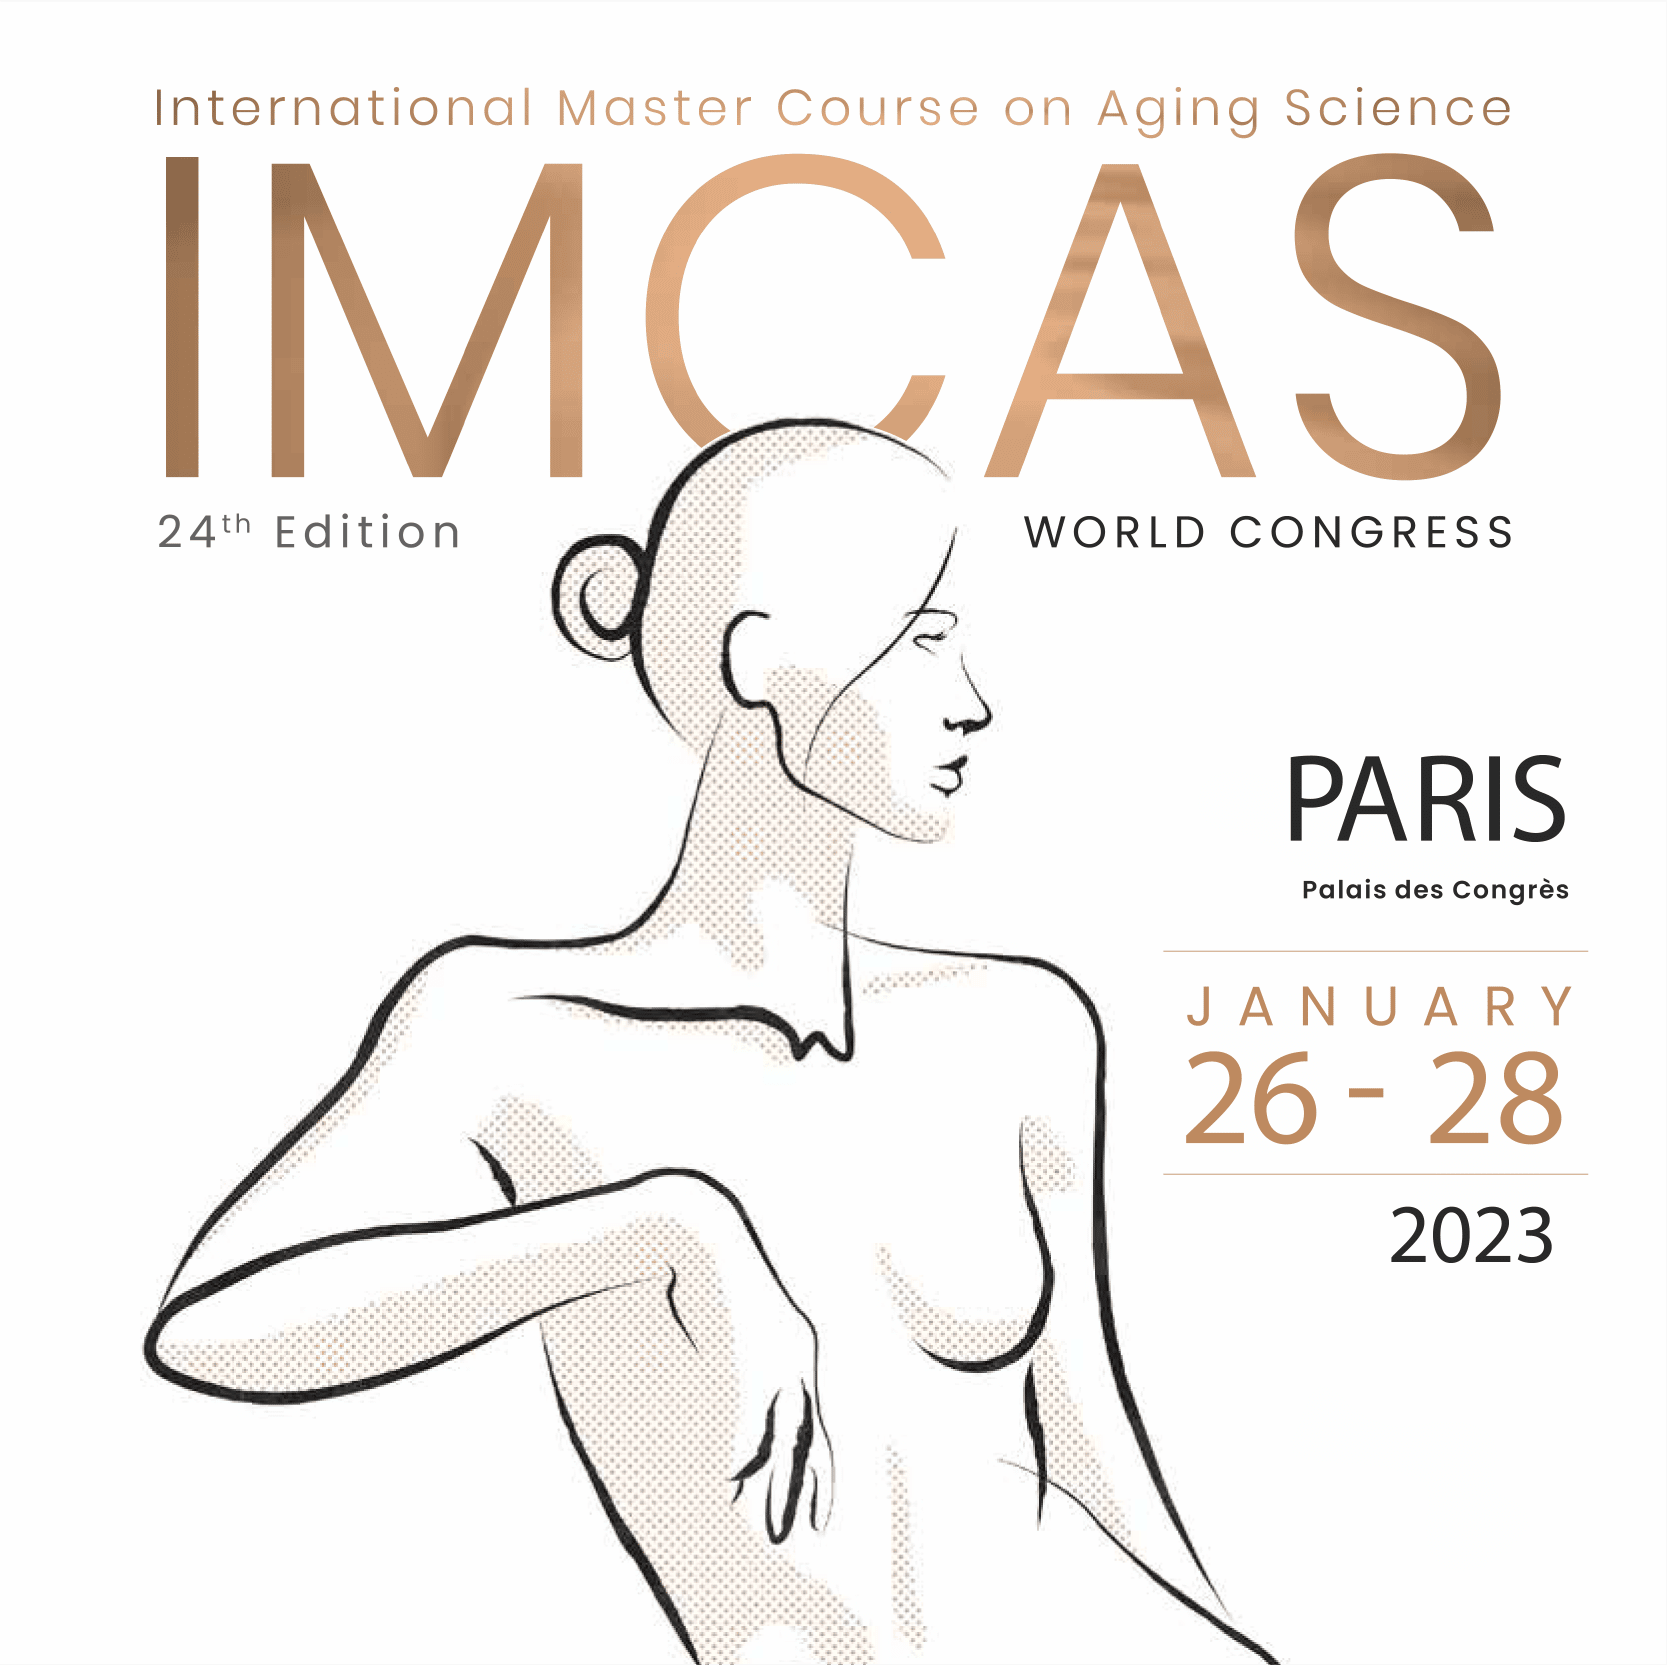 International Master Course on Aging Science IMCAS 2023